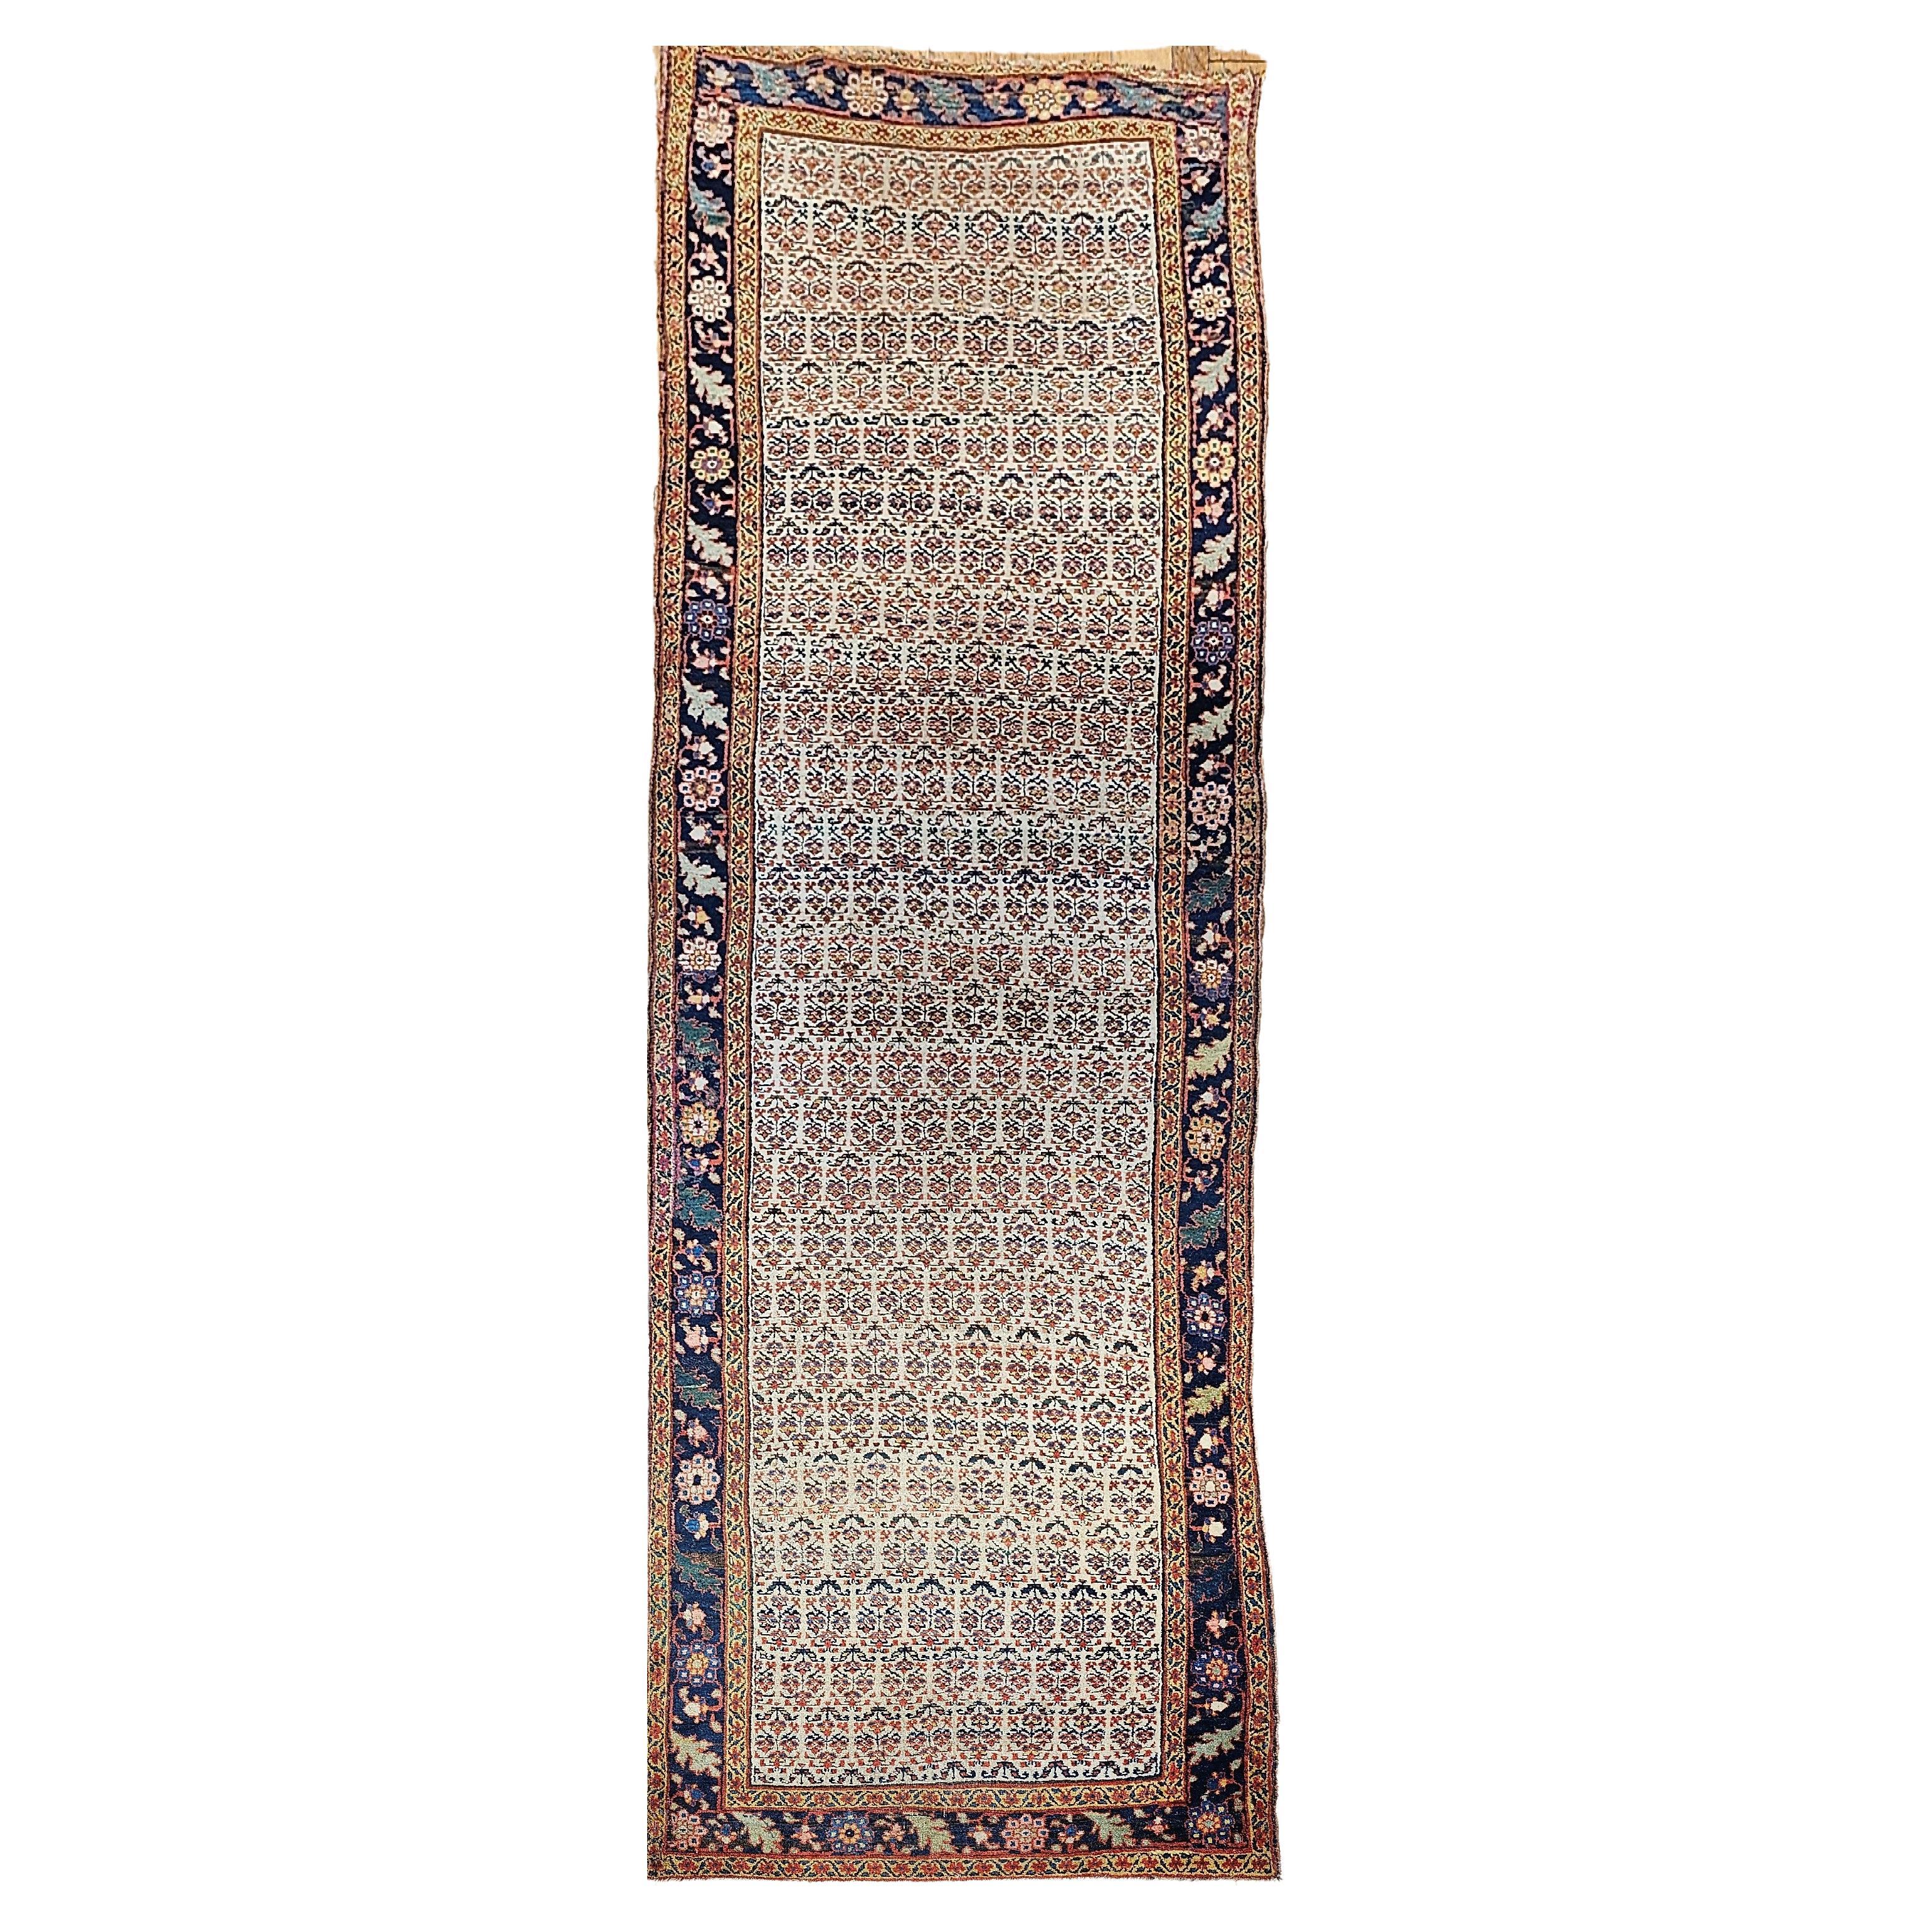 Astonishing beautiful wide Bidjar hallway or gallery runner circa the 4th quarter of the 19th century. The field is in ivory which is extremely desirable with flower heads which is considered a variation of the paisley pattern. The major border is